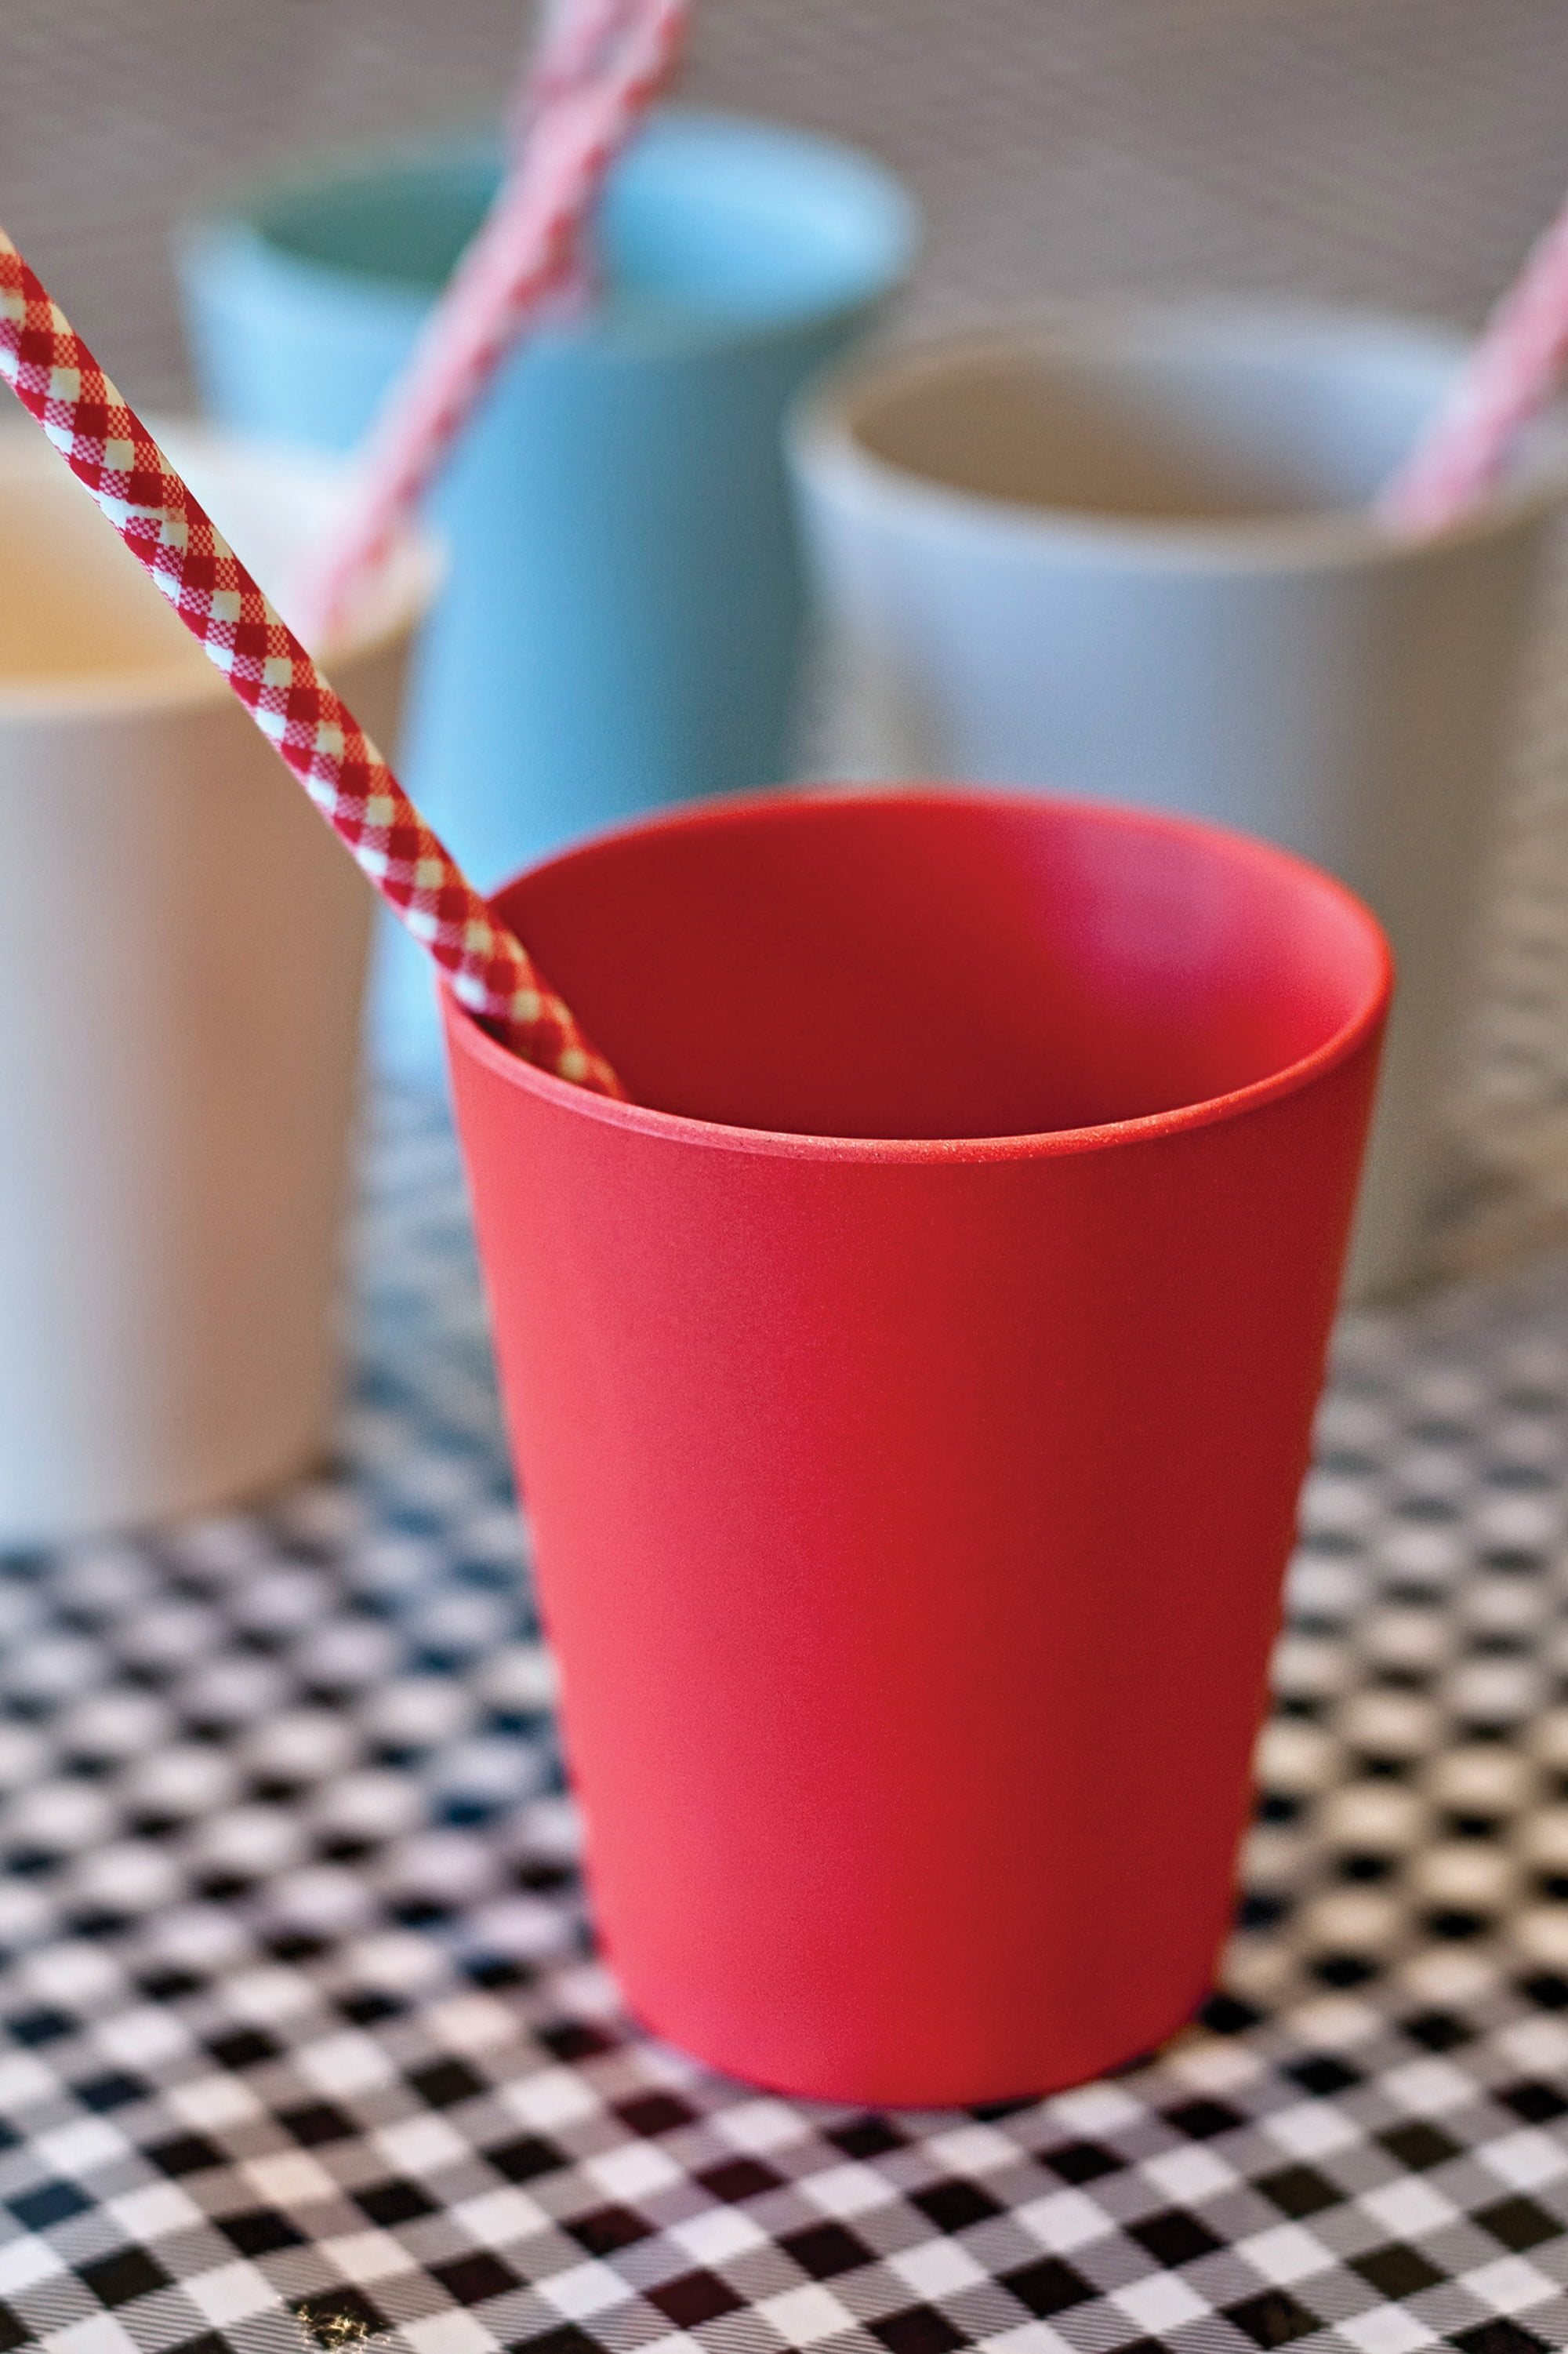 Red Rover 8.45 oz. Bamboo Kids' Cups (Set of 4)